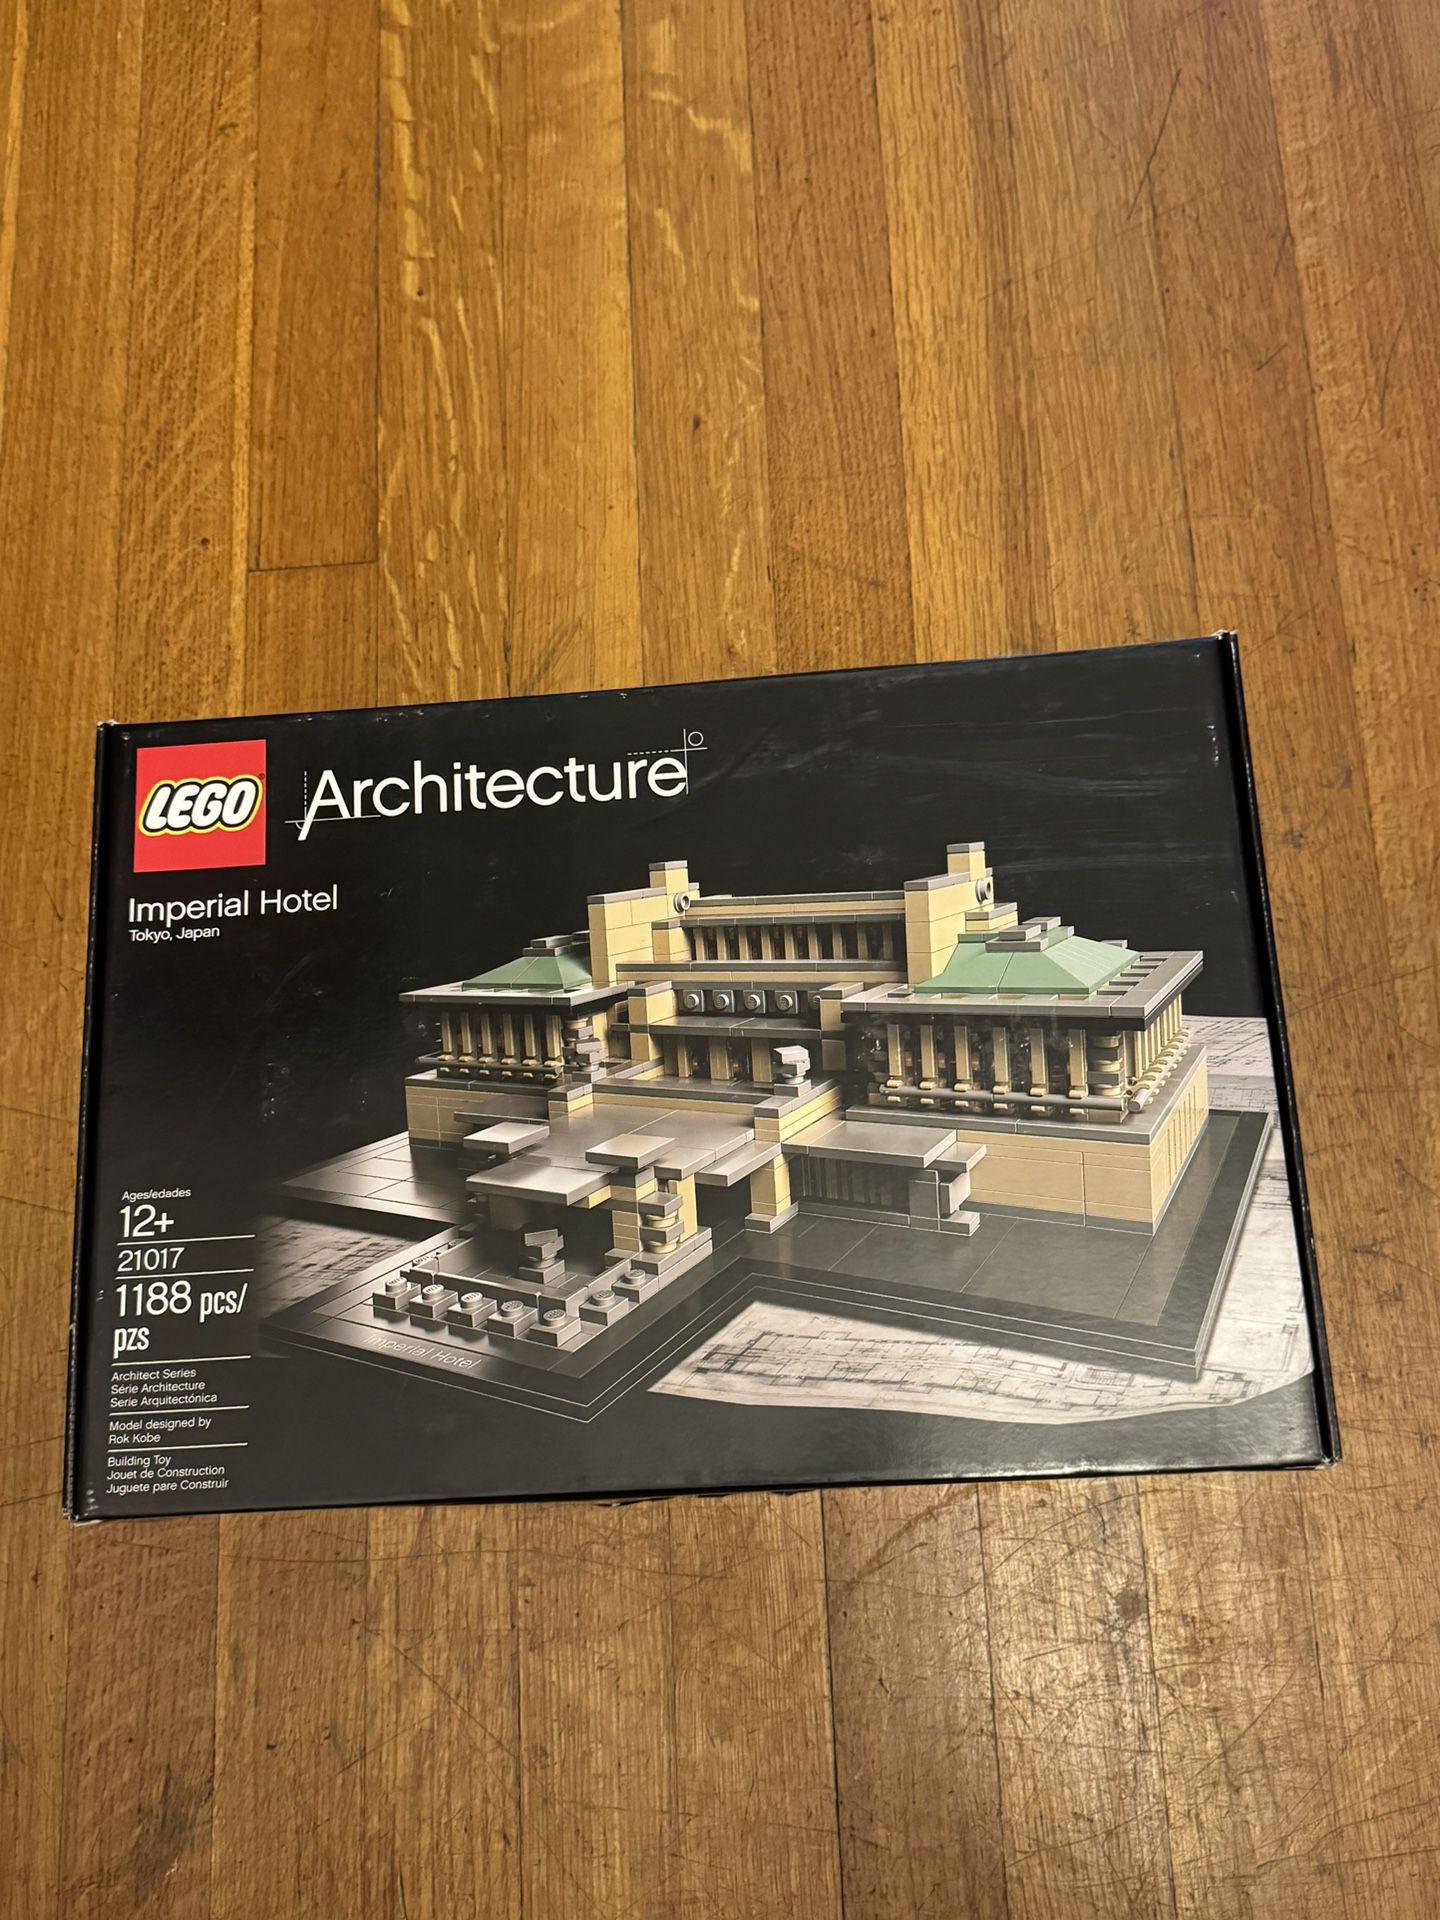 Lego Architecture Imperial Hotel Tokyo, Japan (21017) Brand new